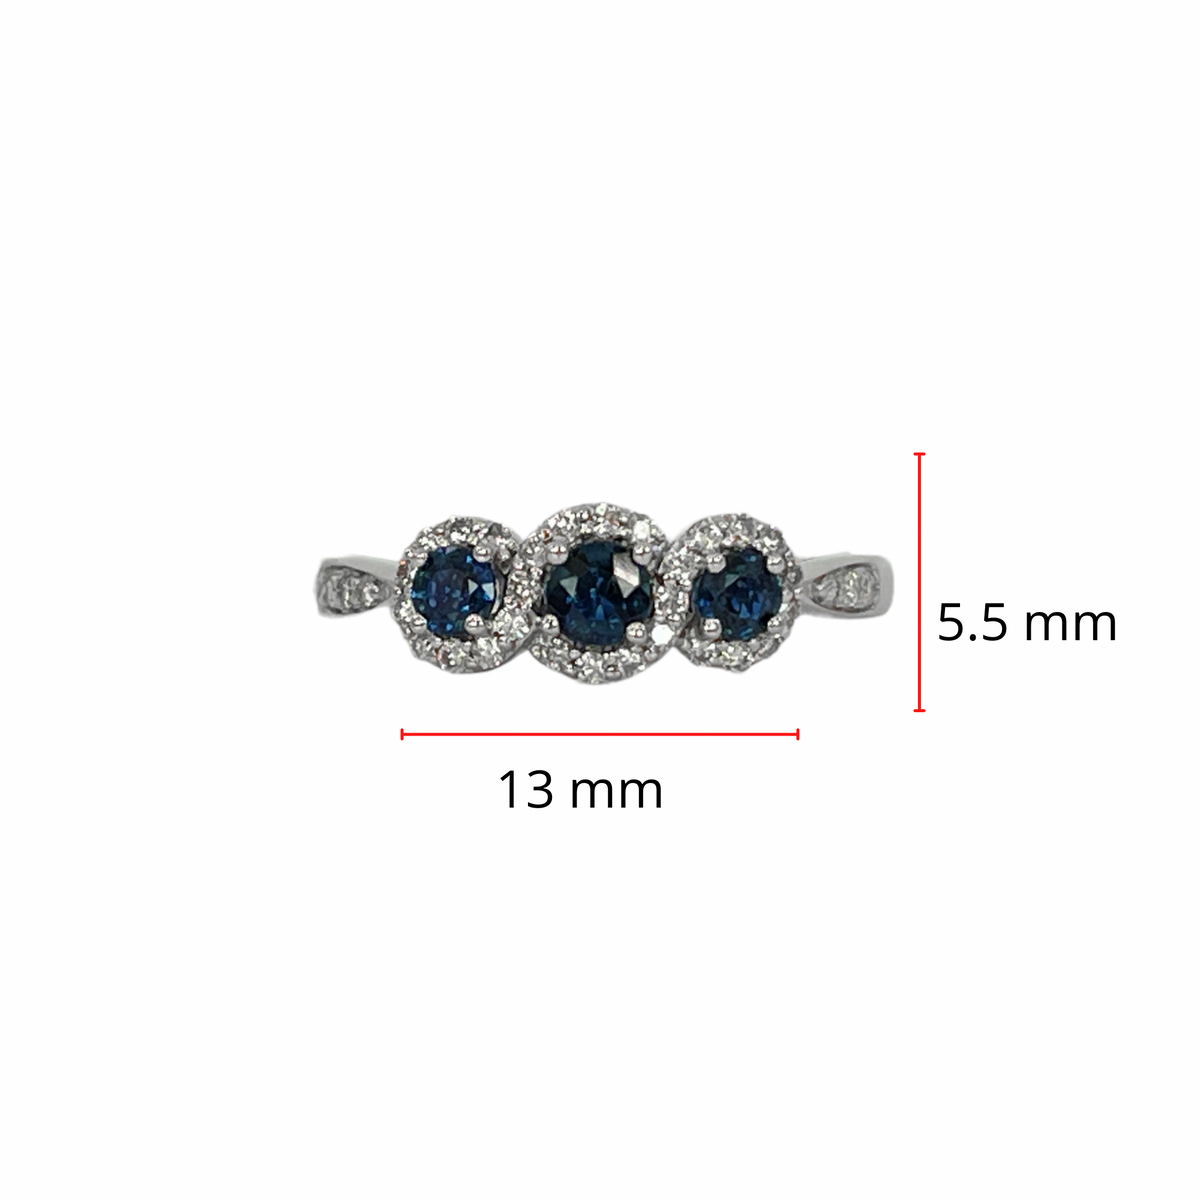 14K White Gold 0.45cttw Sapphire and 0.18cttw Diamond Ring - Size 7